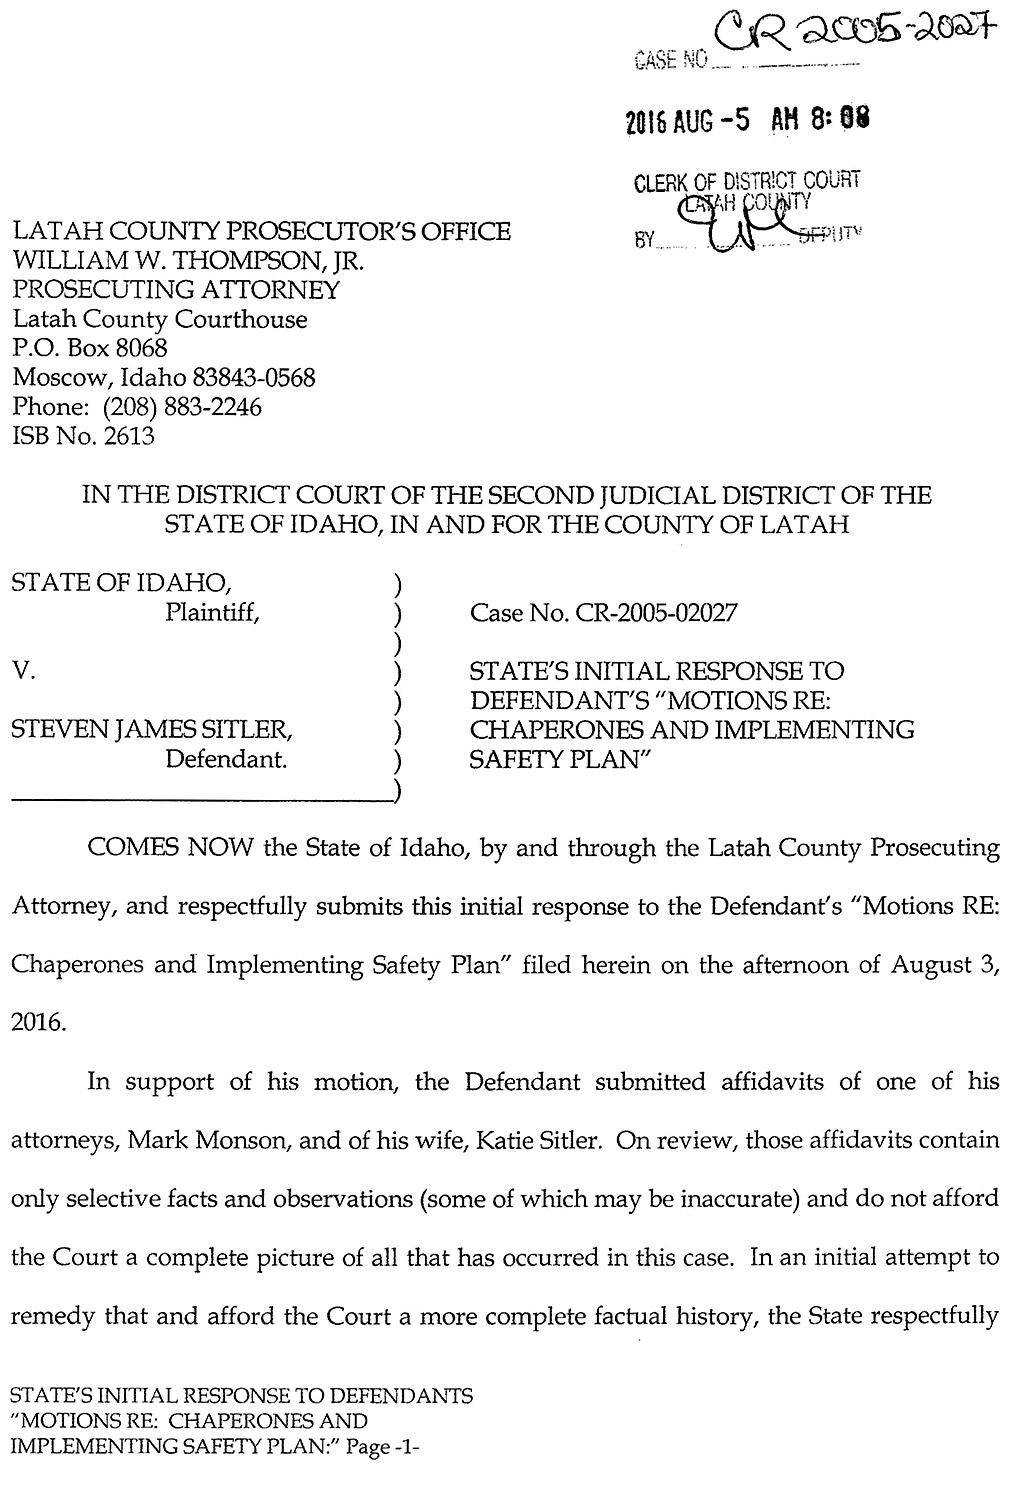 State’s Initial Response to Defendant’s Motions RE: Chaperones and Implementing Safety Plan, page 1